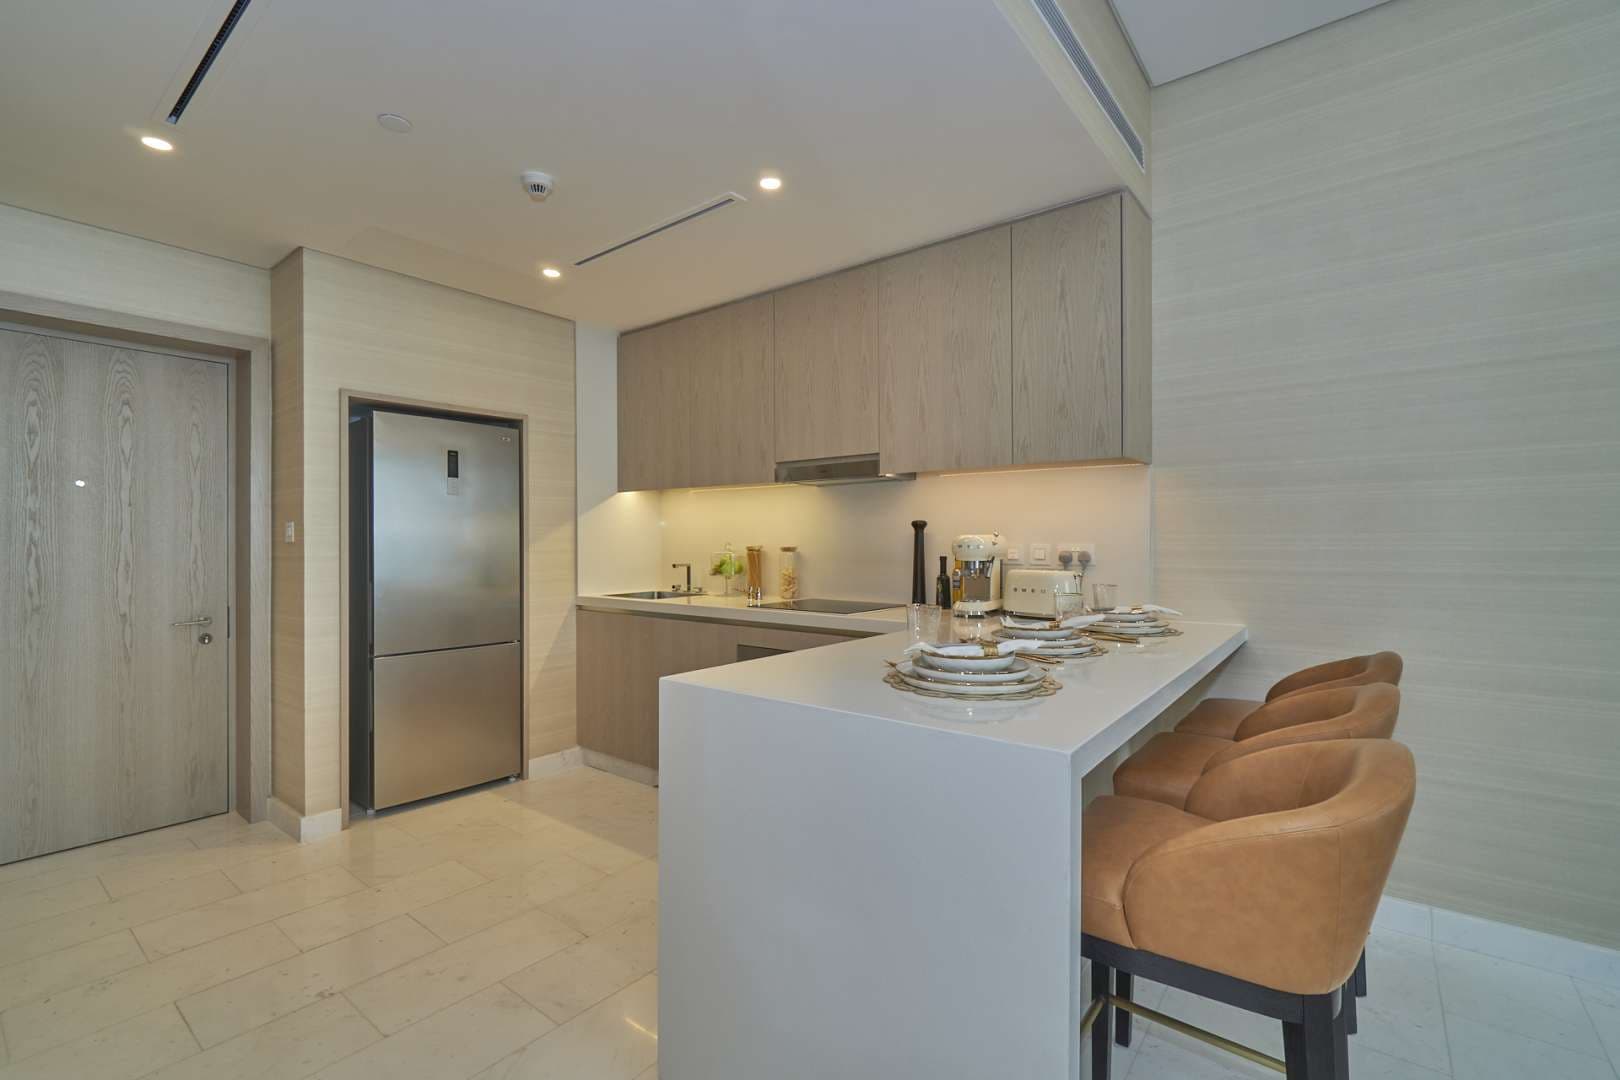 1 Bedroom Apartment For Sale The Palm Tower Lp07256 2ad91e750987fa00.jpg